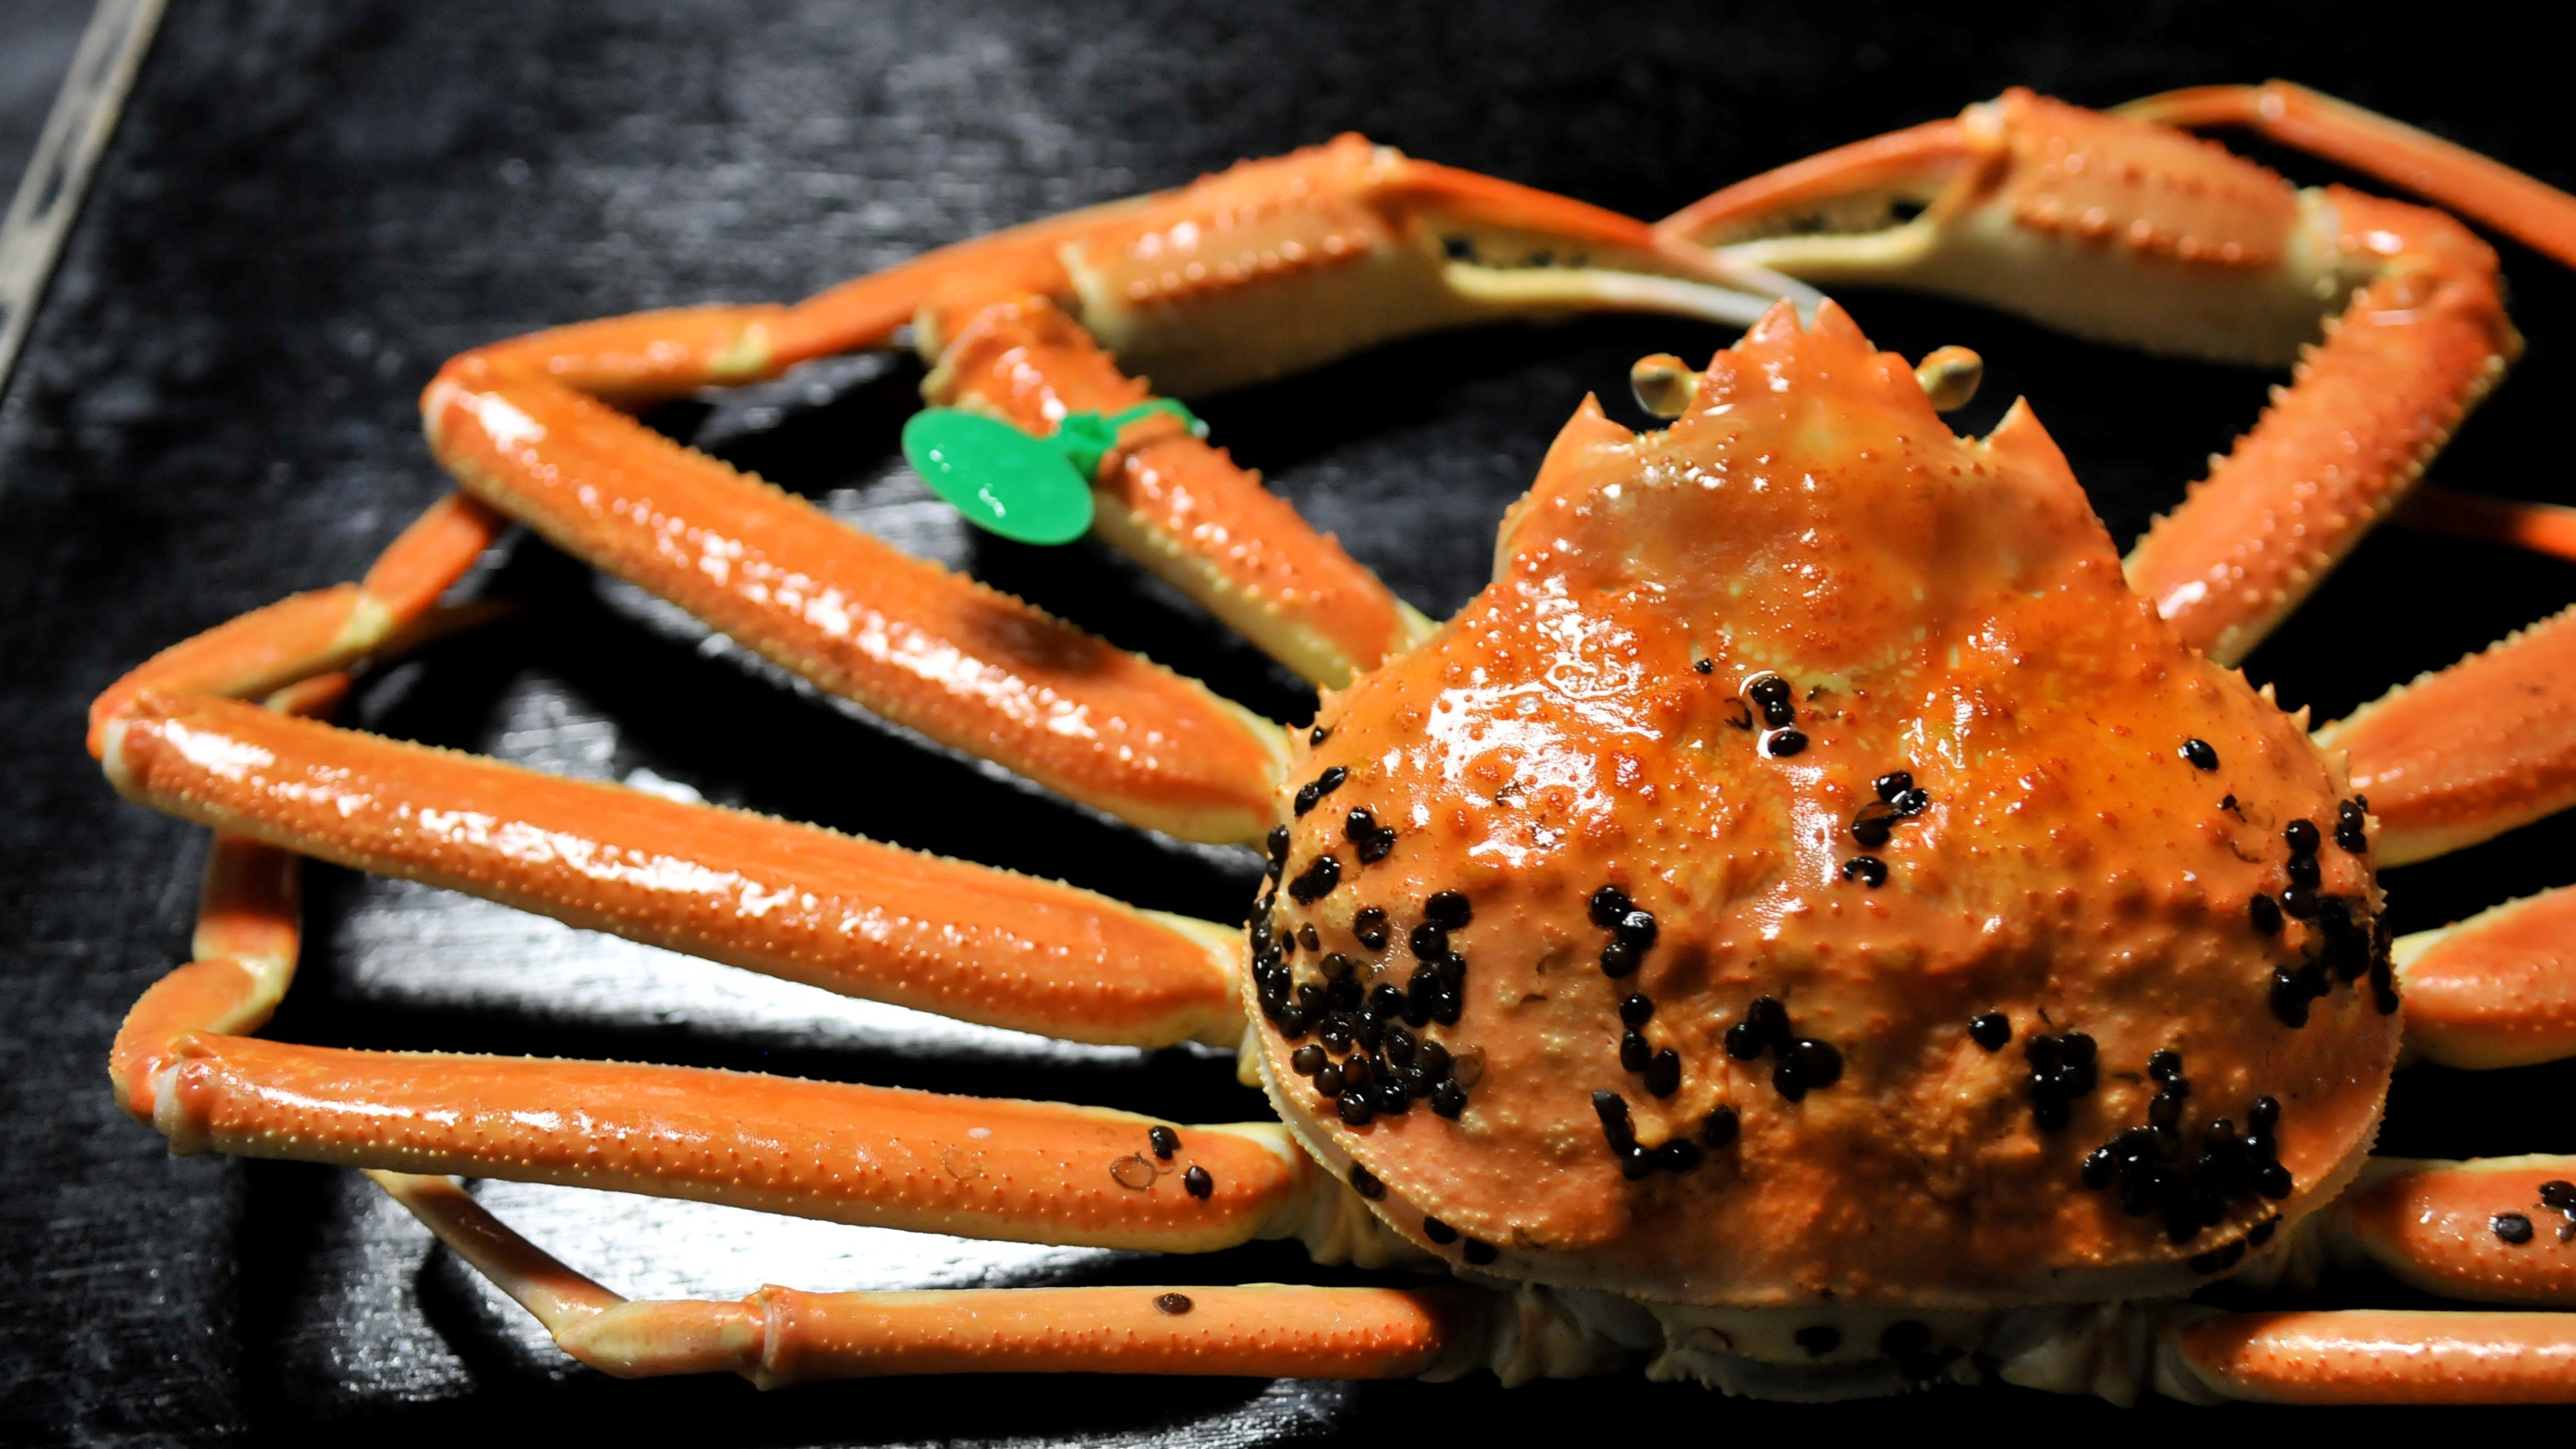 [Phantom Majin Crab] We received the only "Crab Cuisine / Modern Master Craftsman" from Kyoto Prefecture in Japan. The original crab full-course inn.